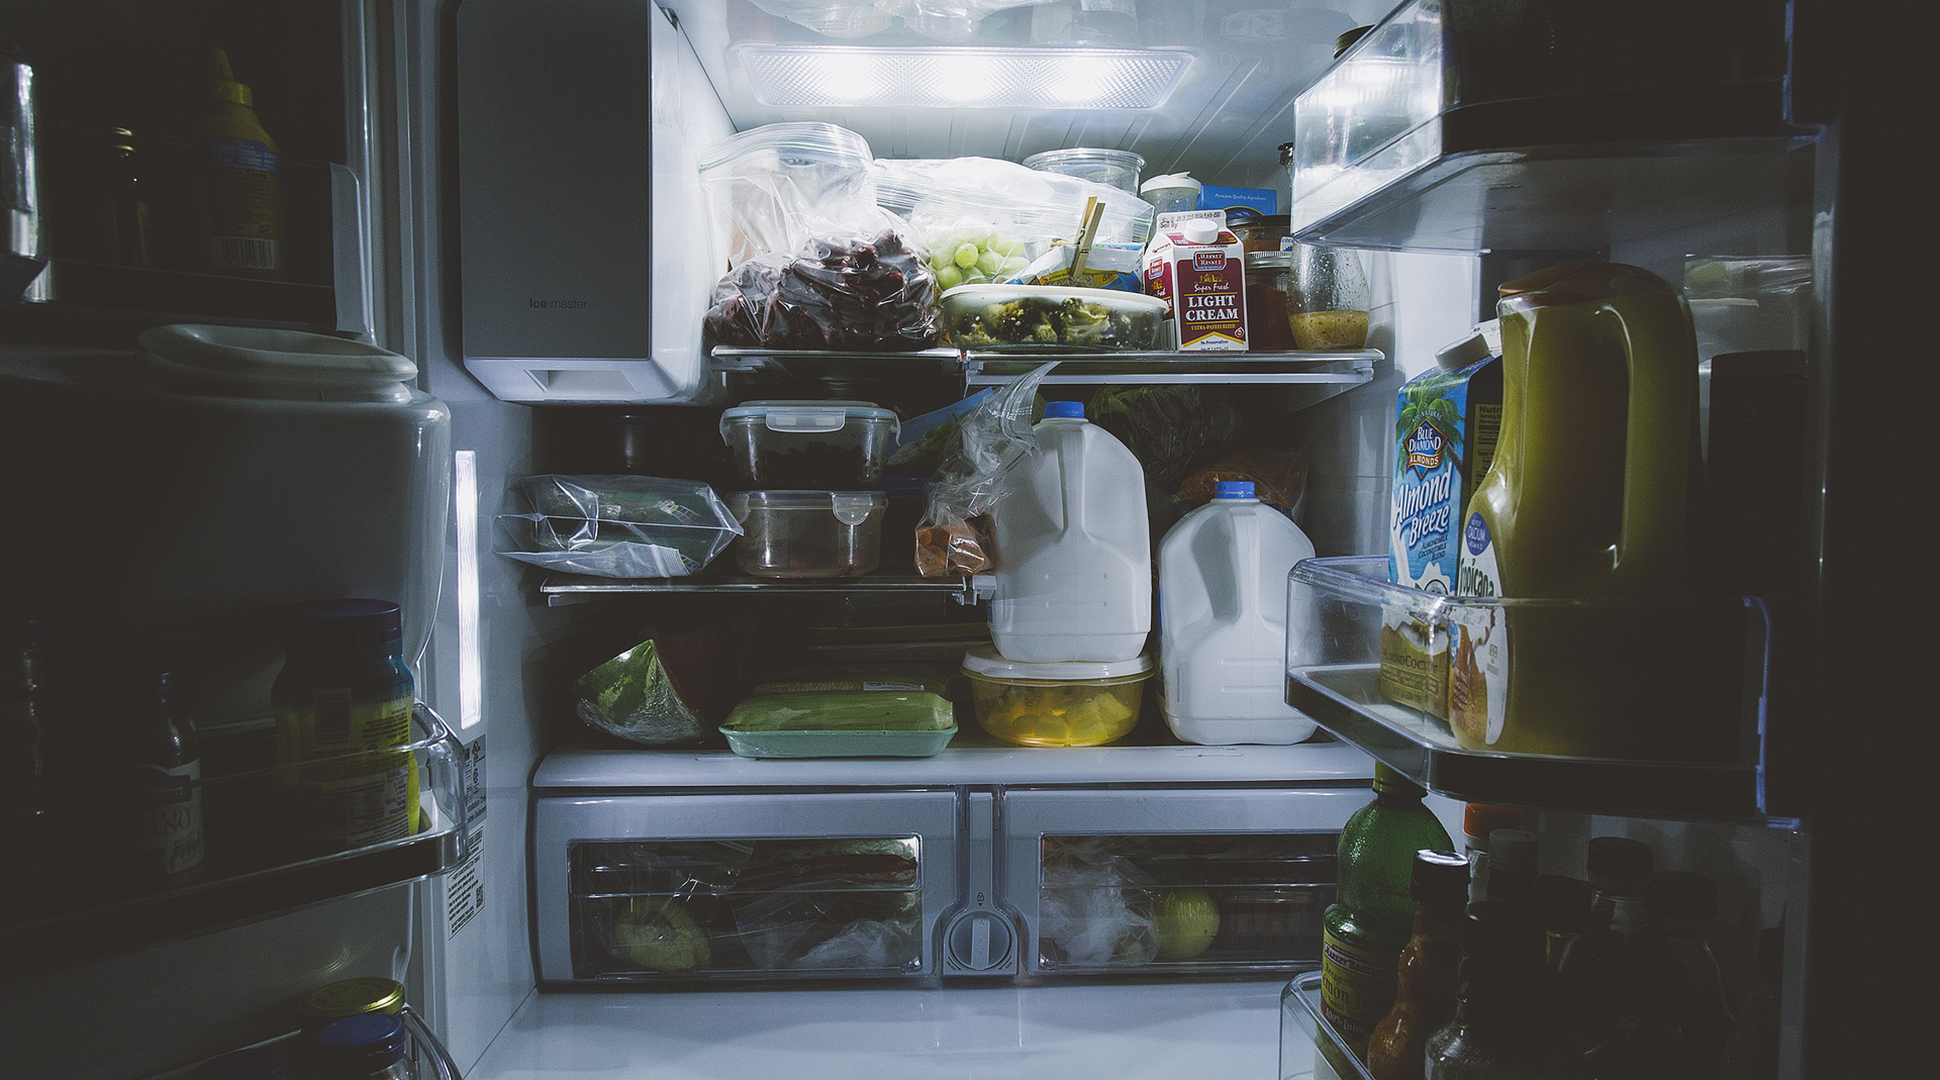 Are you storing food safely?